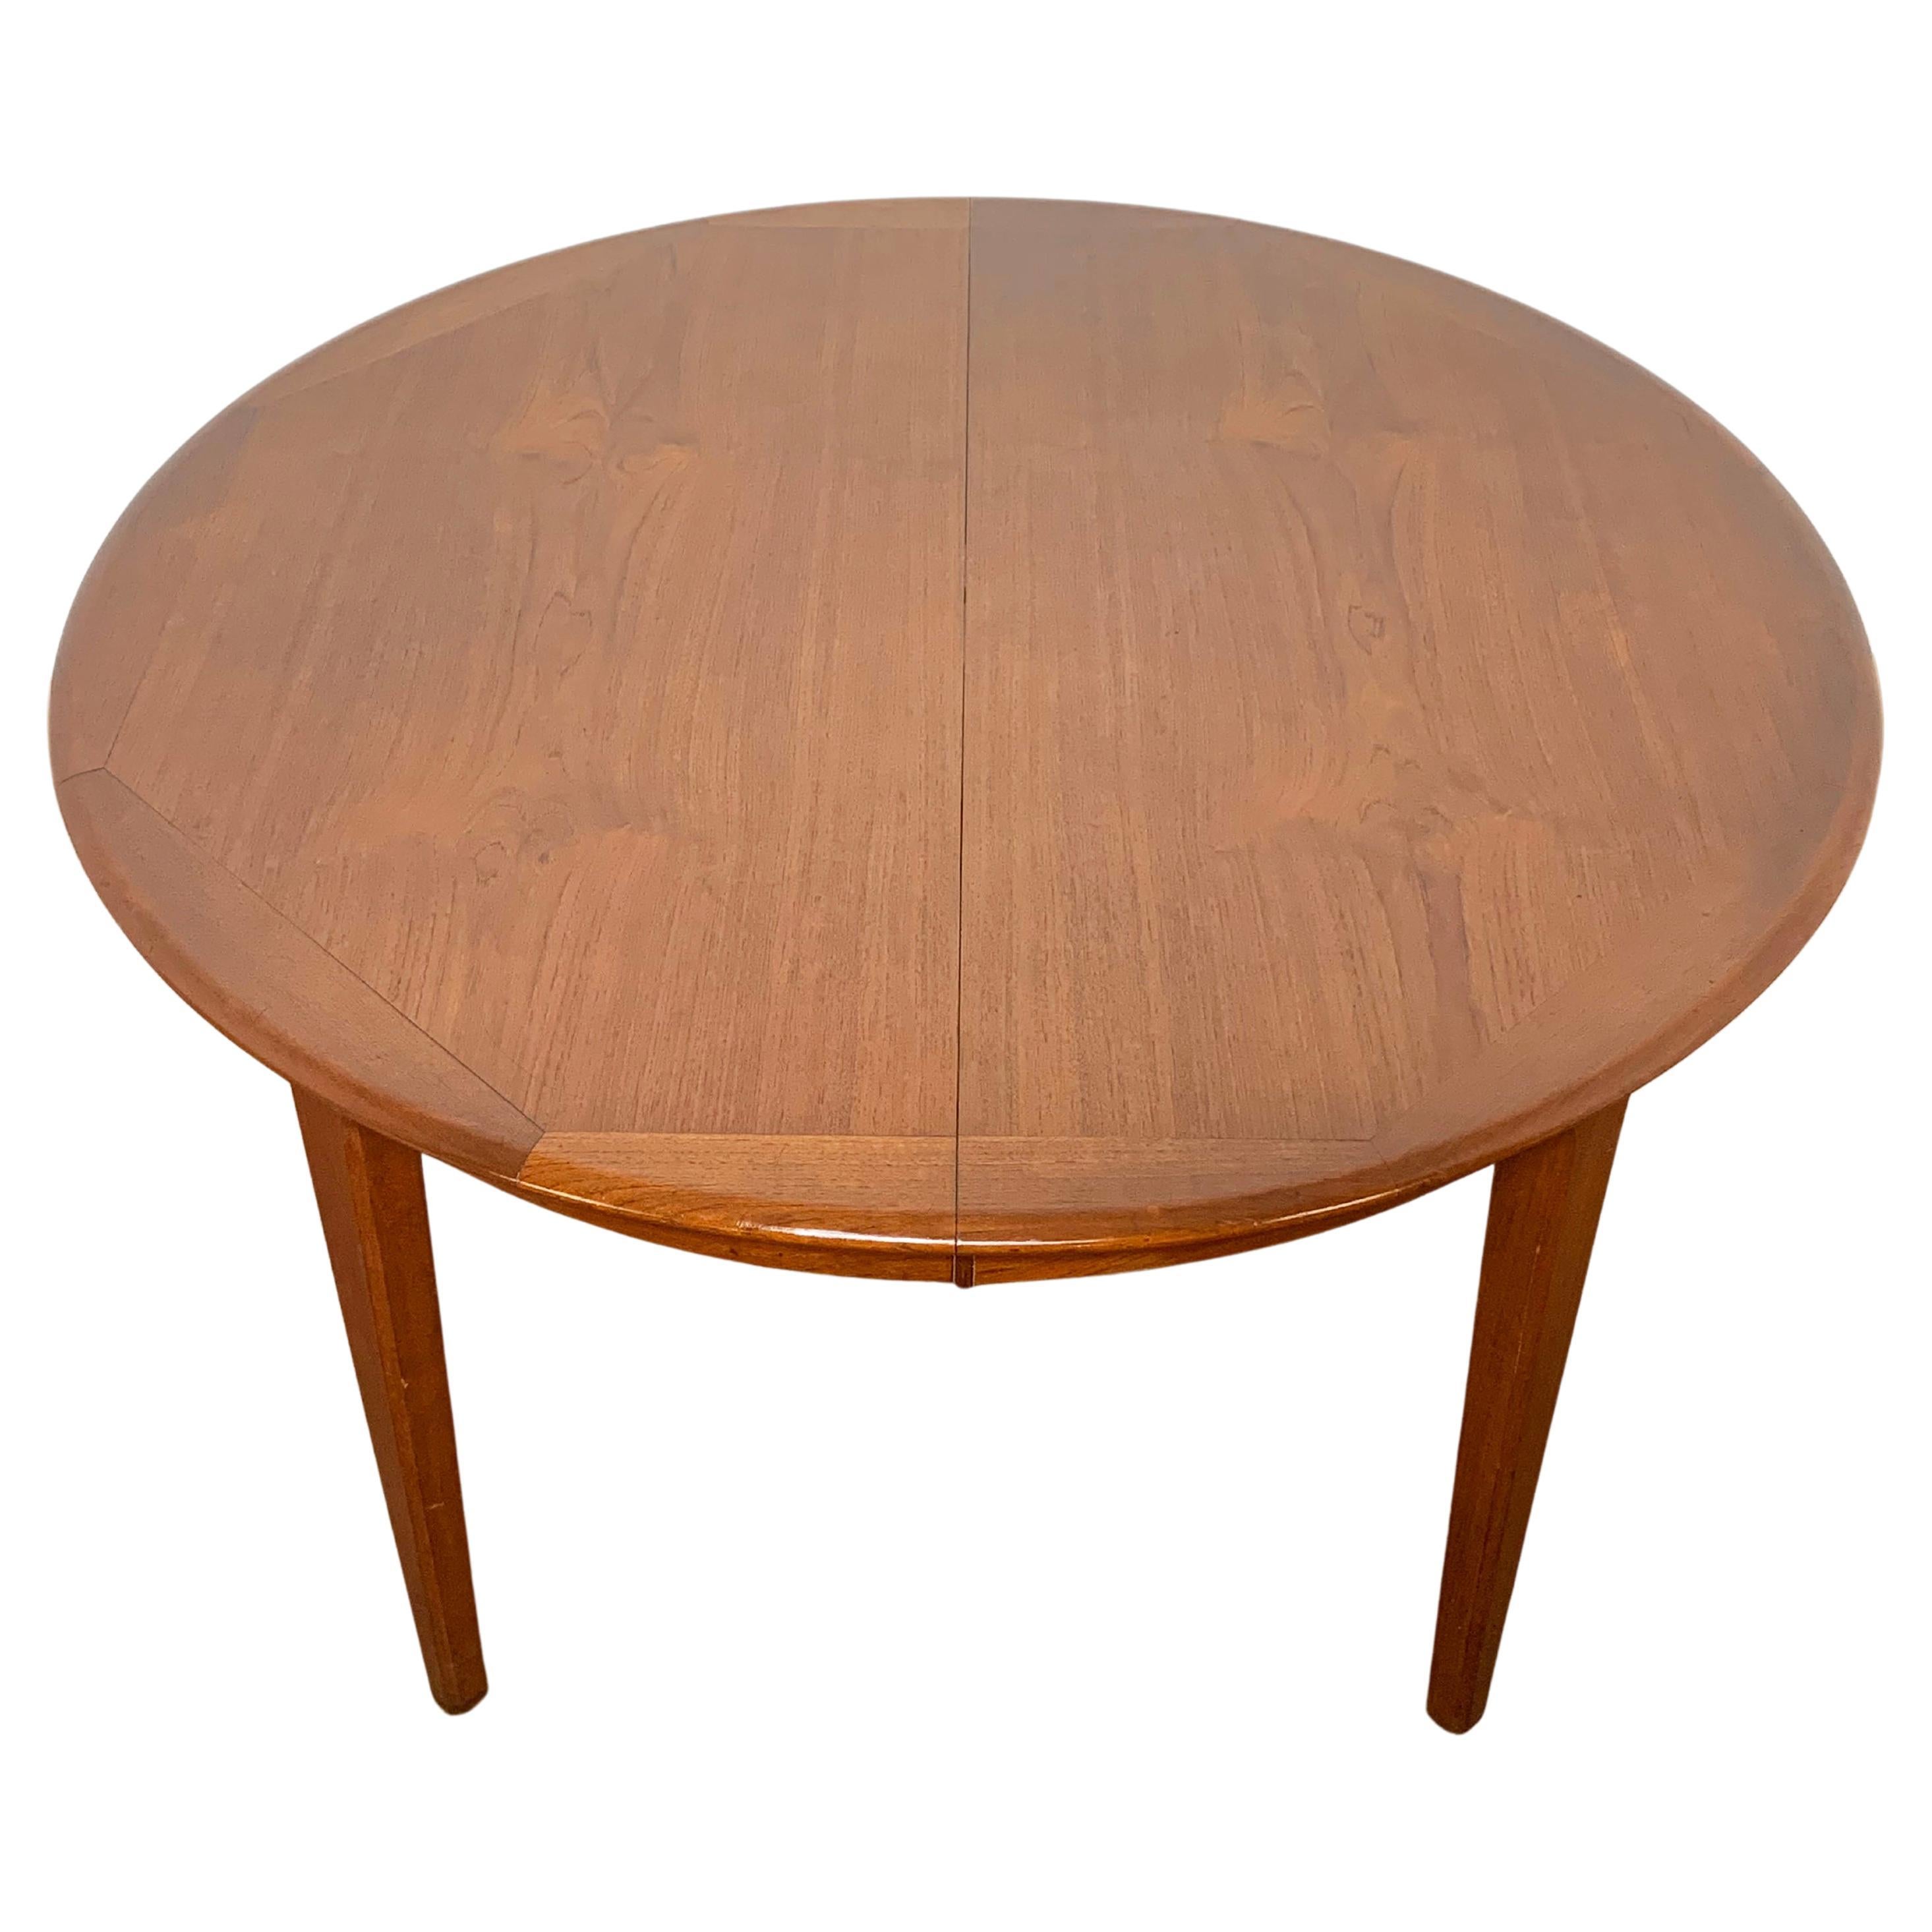 Danish Modern Round Teak Dining Table with Two Leaves, Circa 1960s